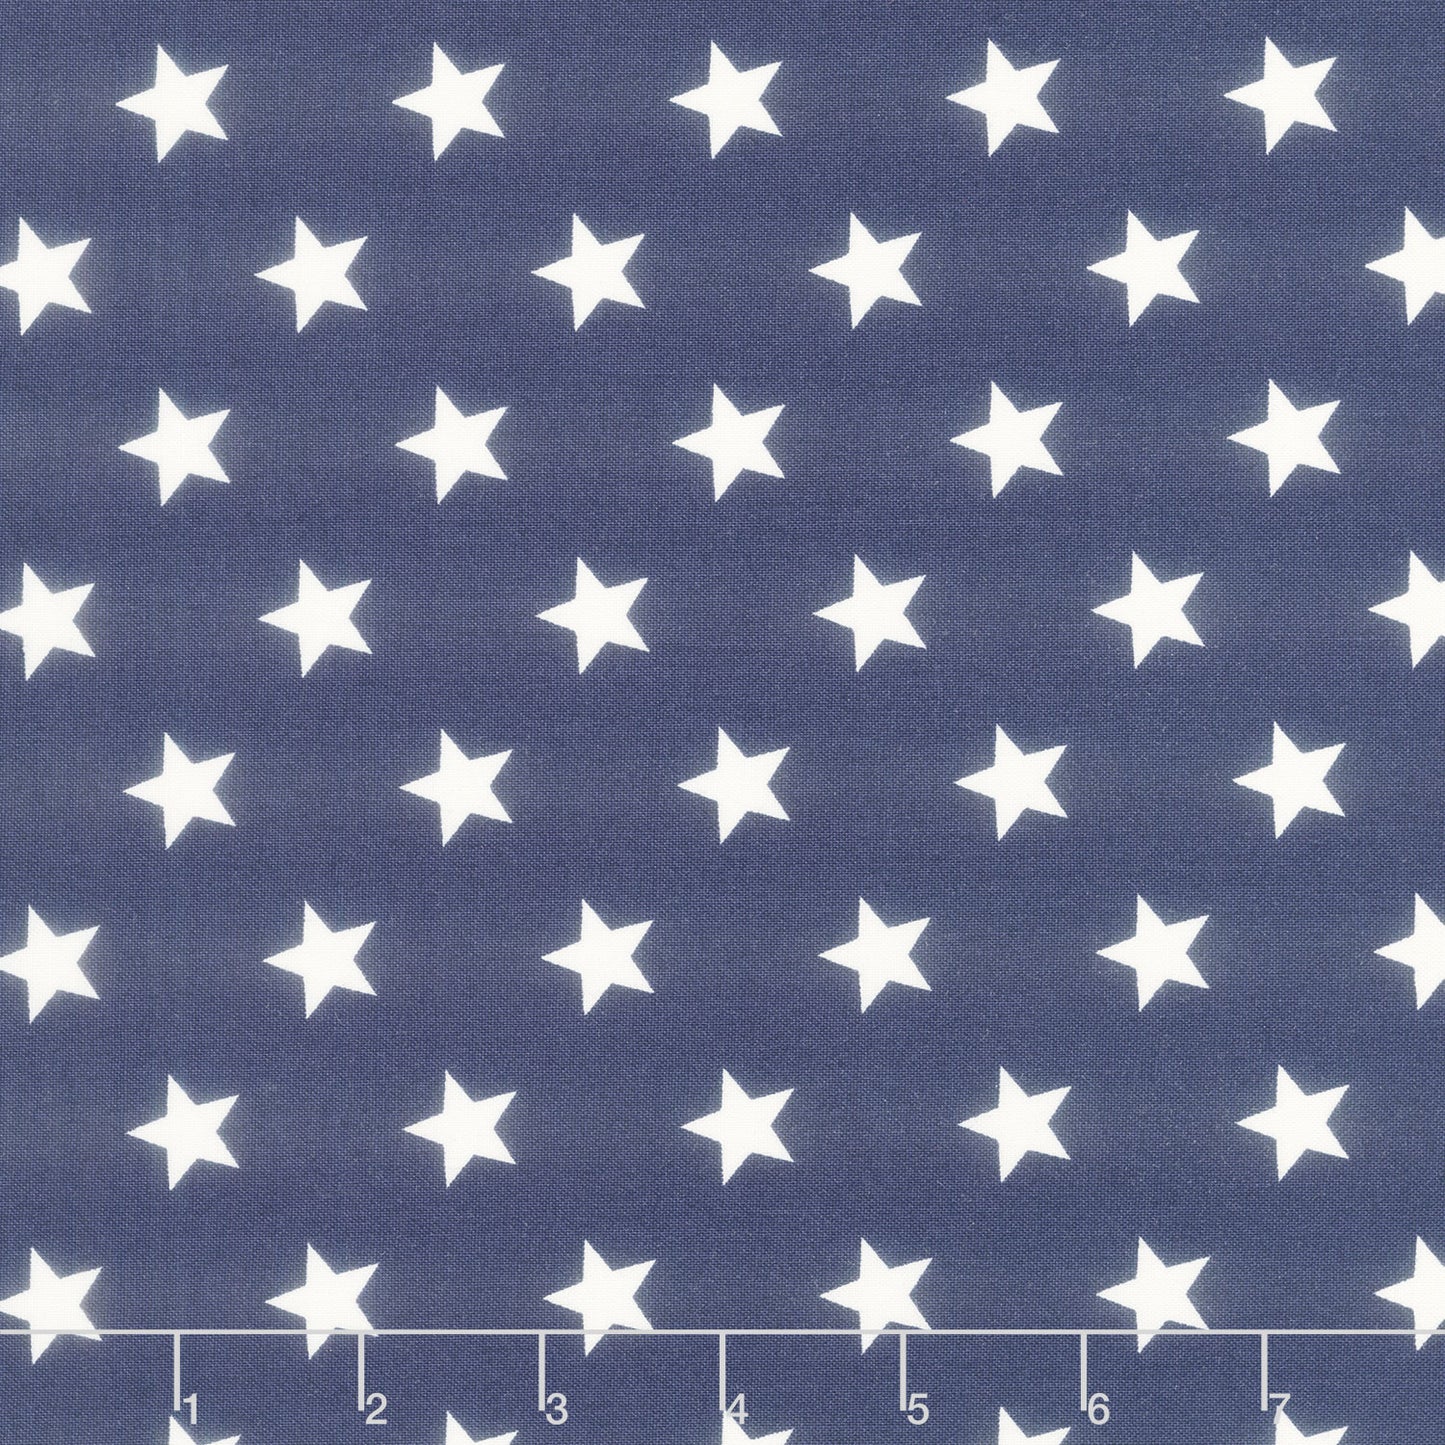 Monthly Placemat Coordinate - Stars Navy Yardage Primary Image